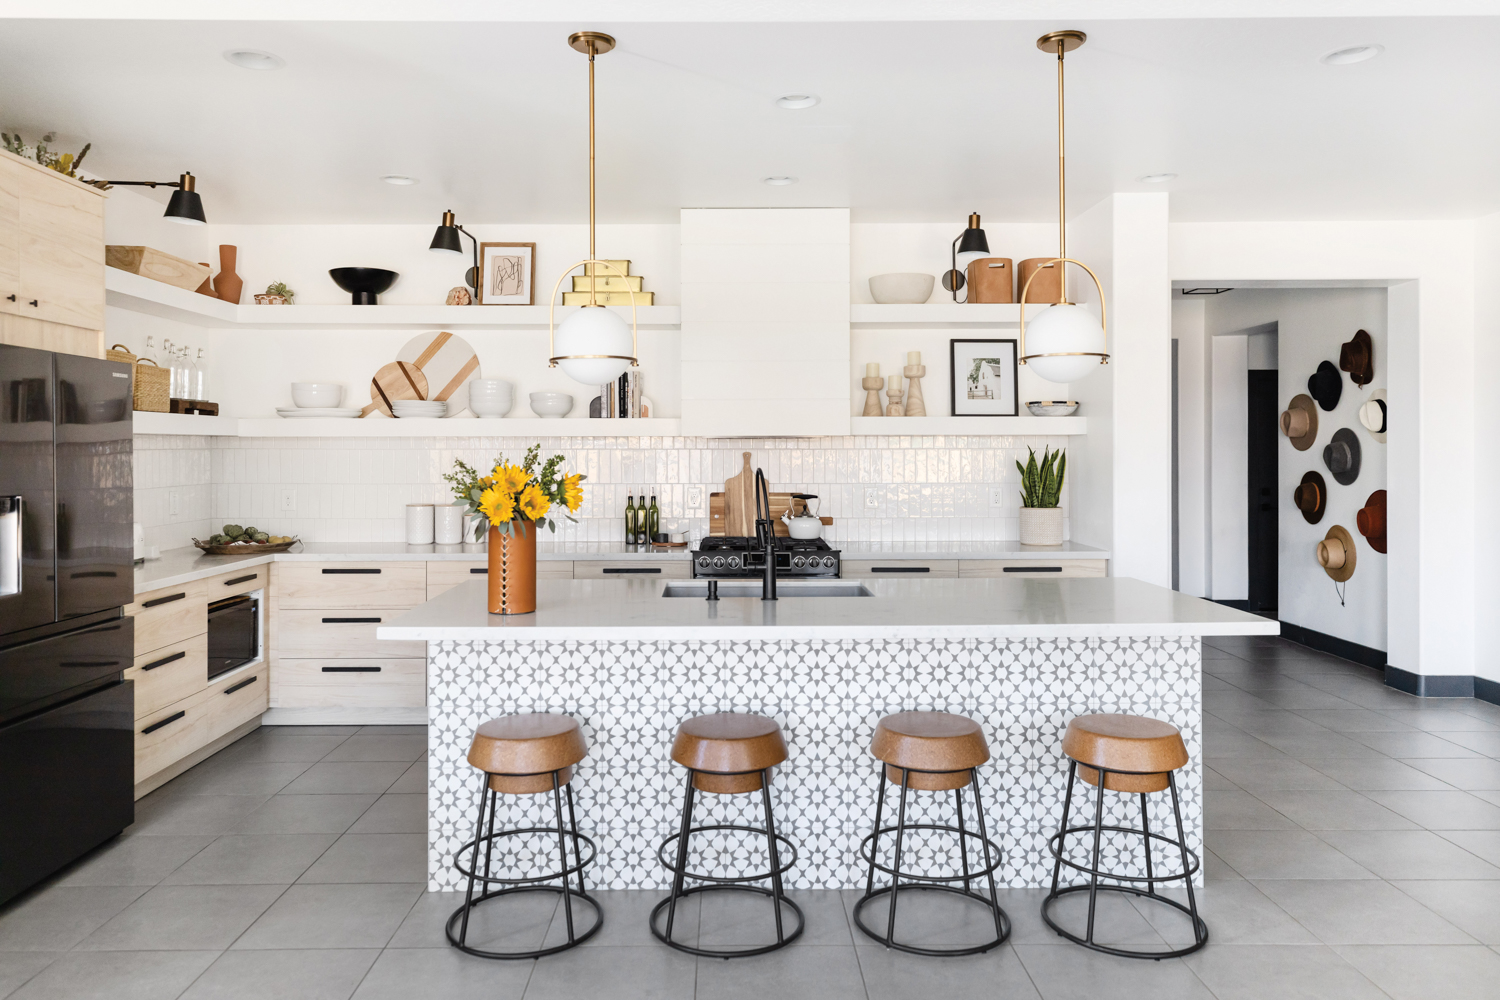 White kitchen with open shelving and geometric-patterned tile on island base.